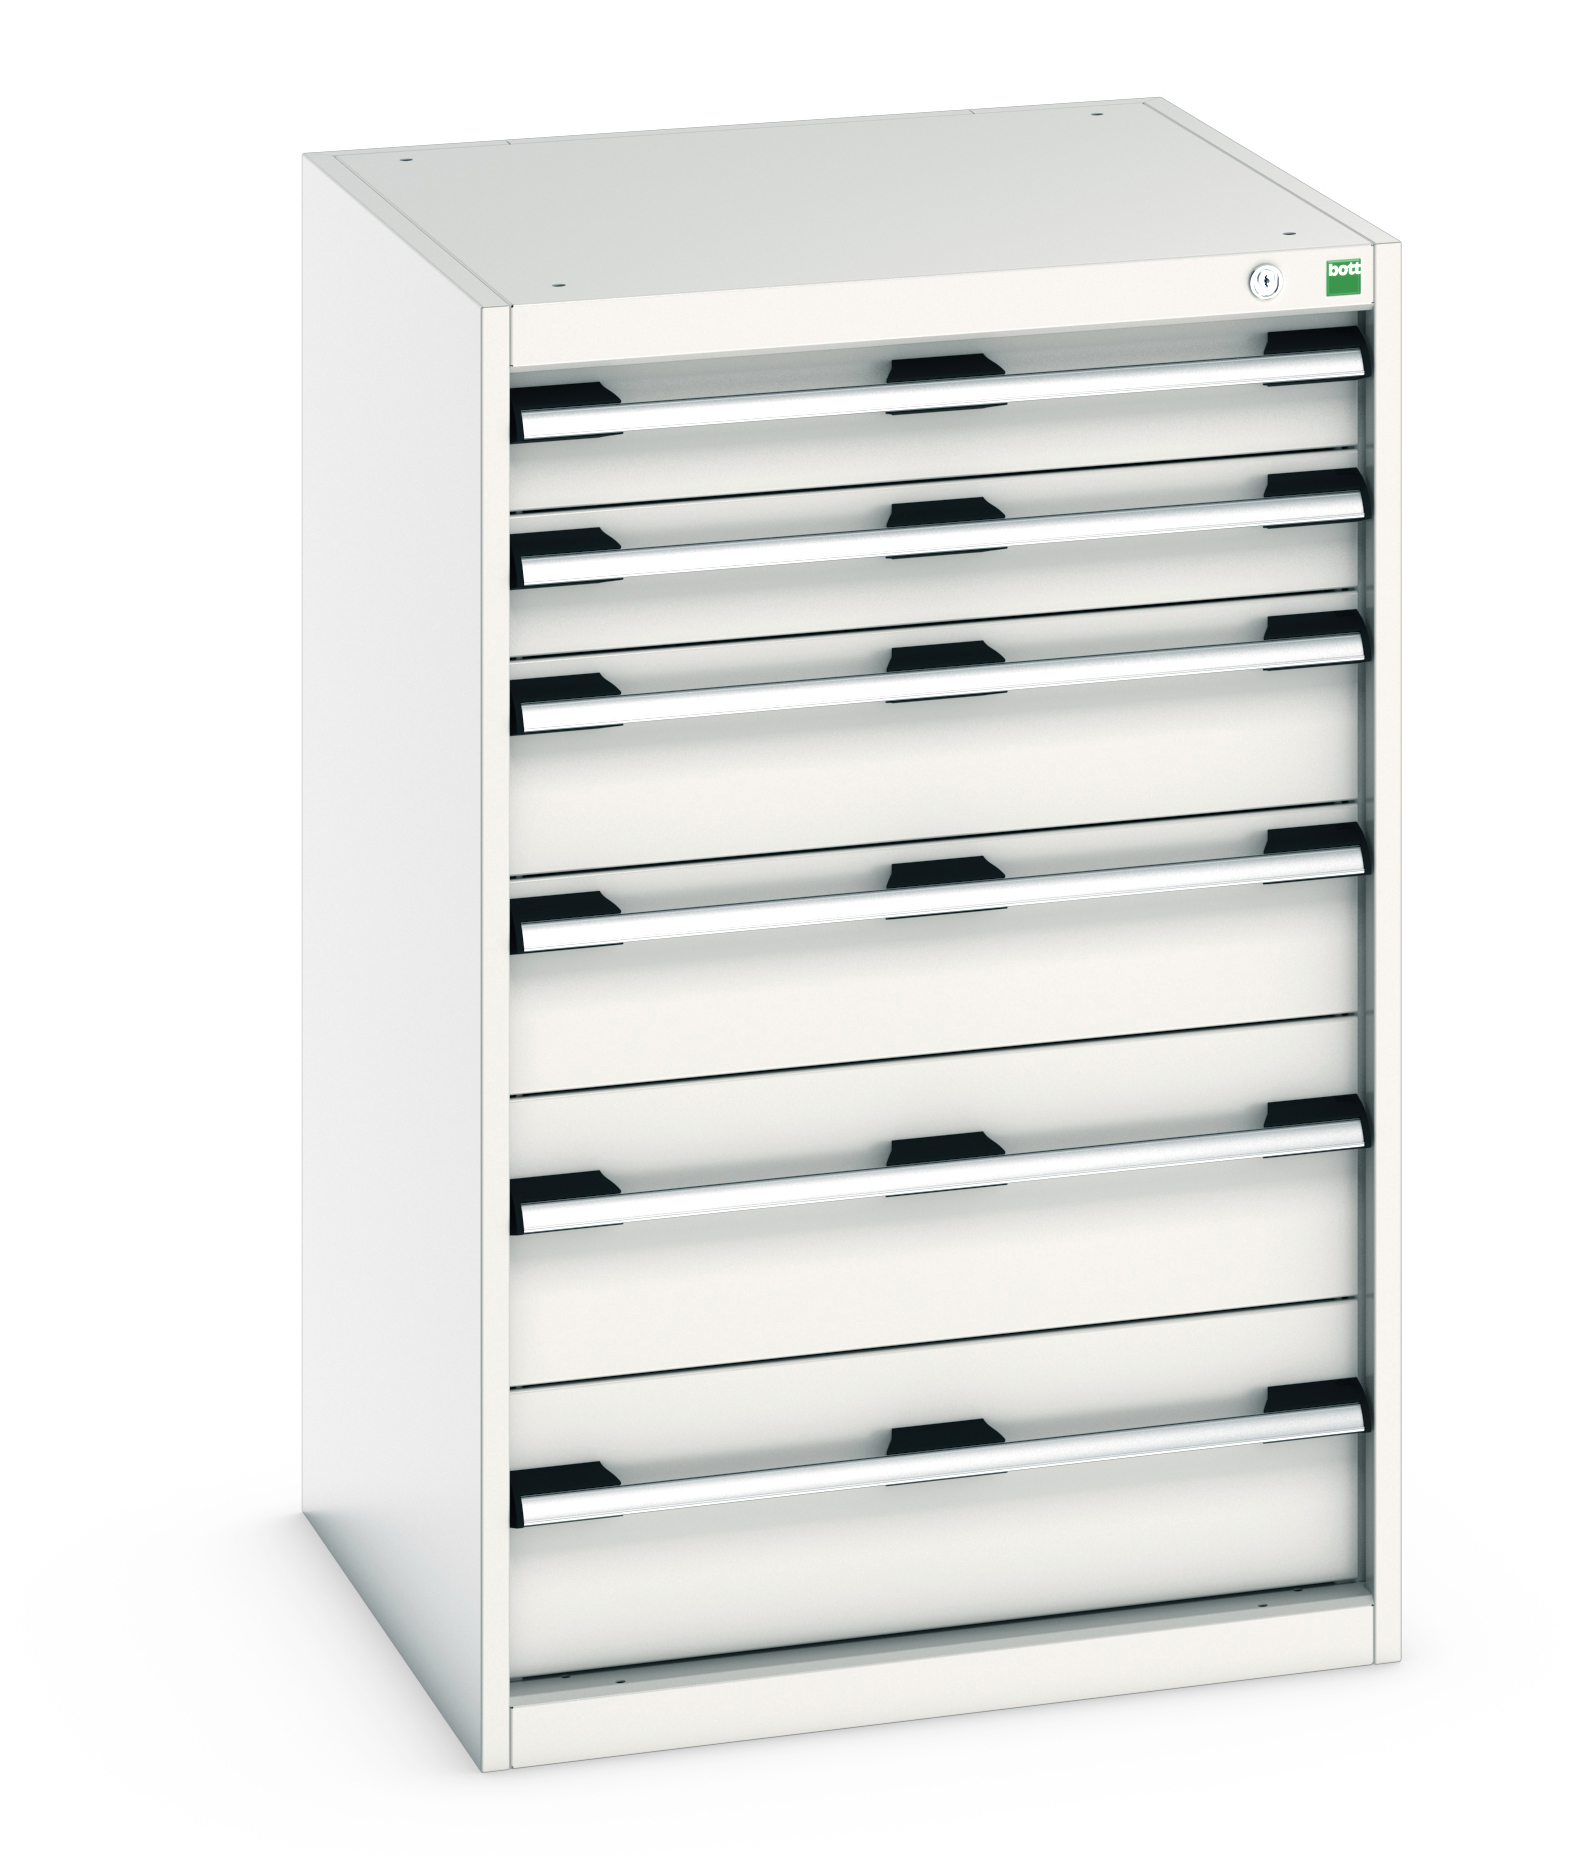 Bott Cubio Drawer Cabinet With 6 Drawers - 40019059.16V